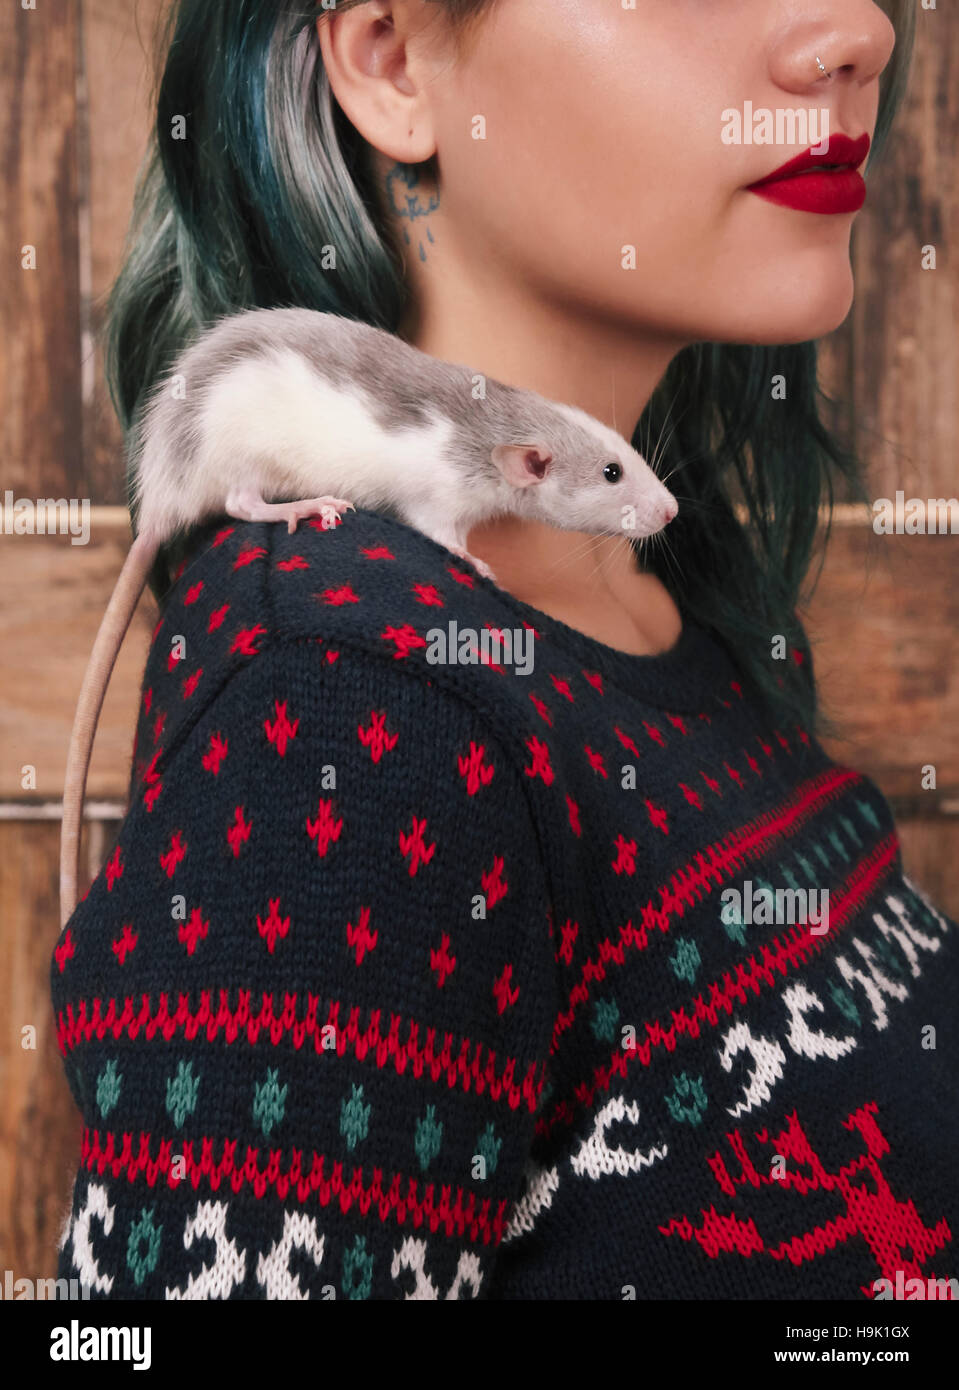 Young woman with pet rat on her shoulder wearing patterned knit pullover Stock Photo